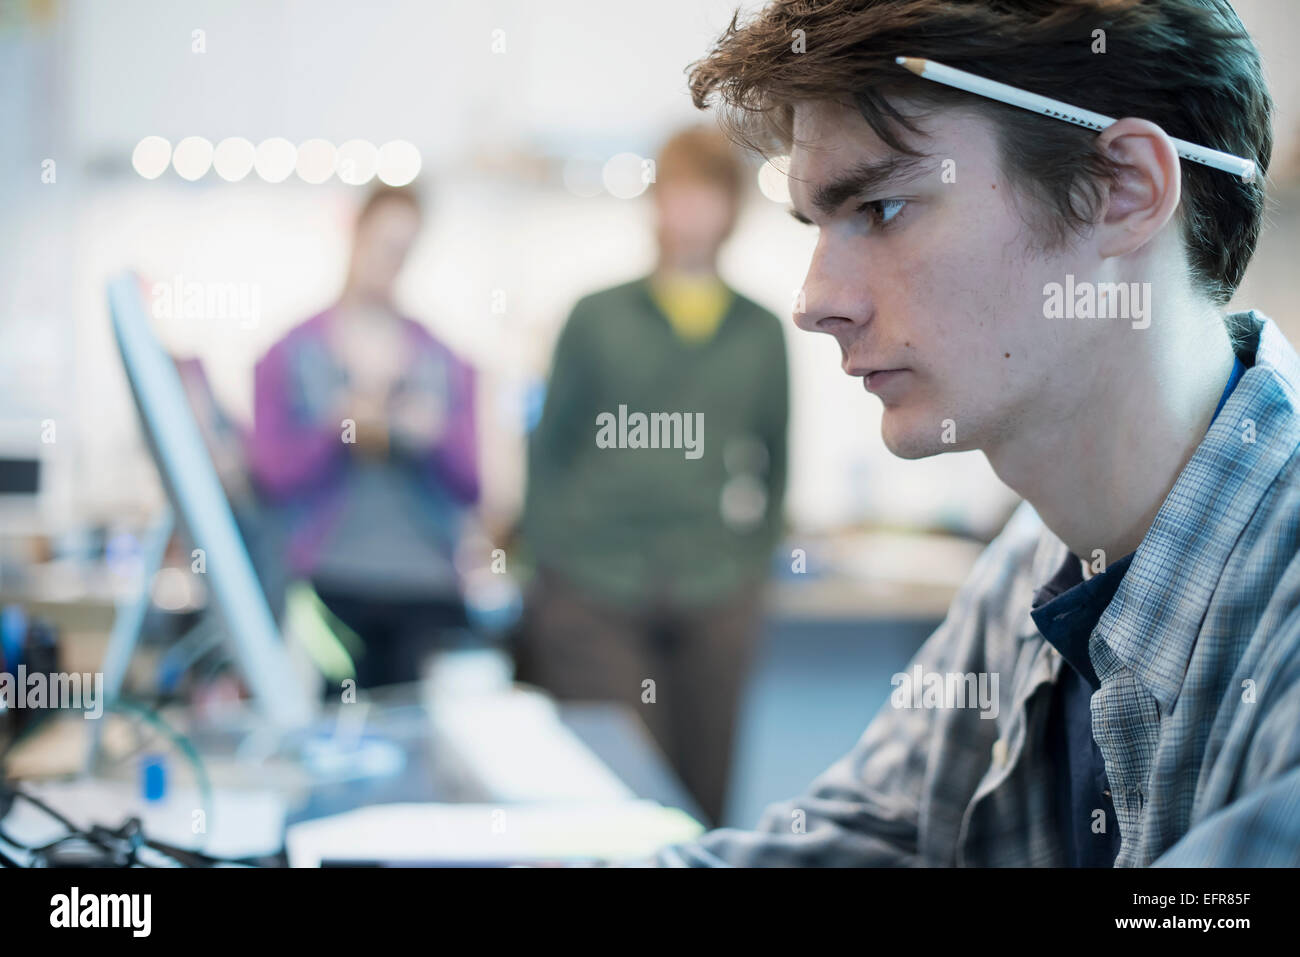 A young man seated at a computer in a repair shop.  Two people in the background. Stock Photo